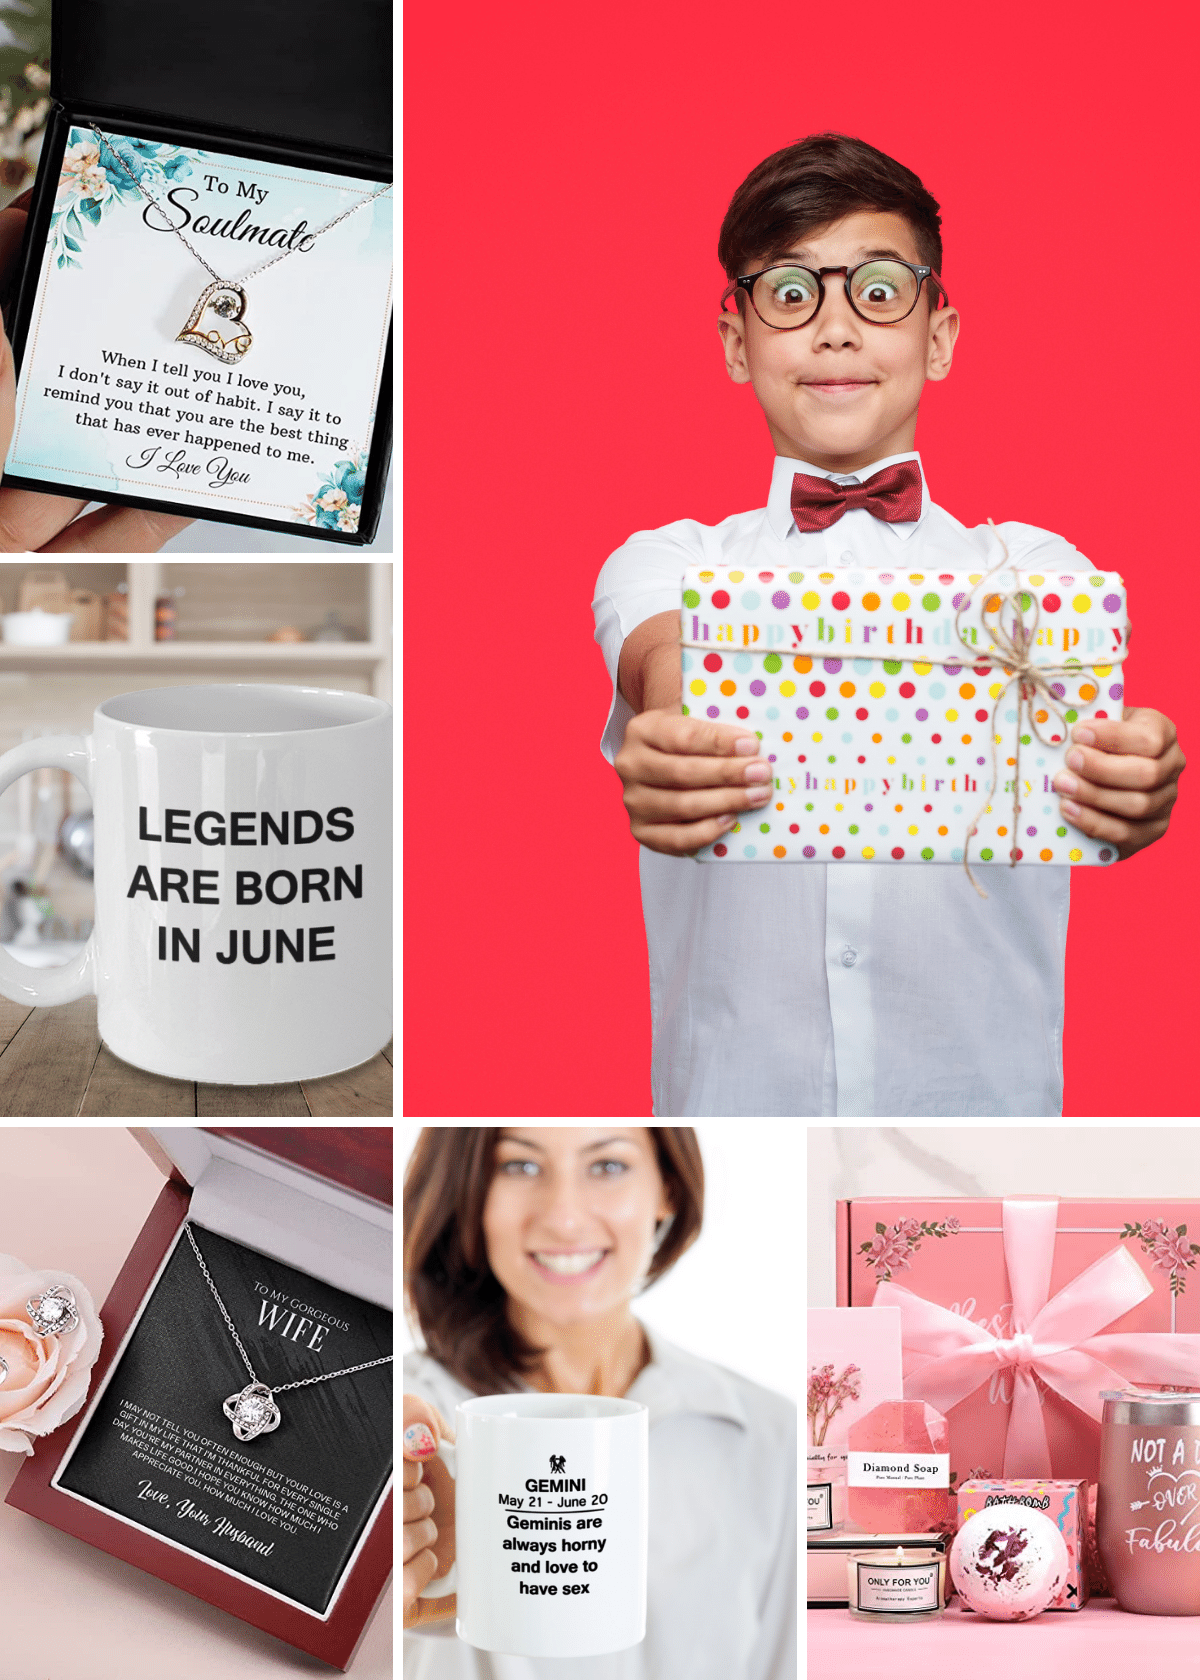 The Best Birthday Gifts for June babies